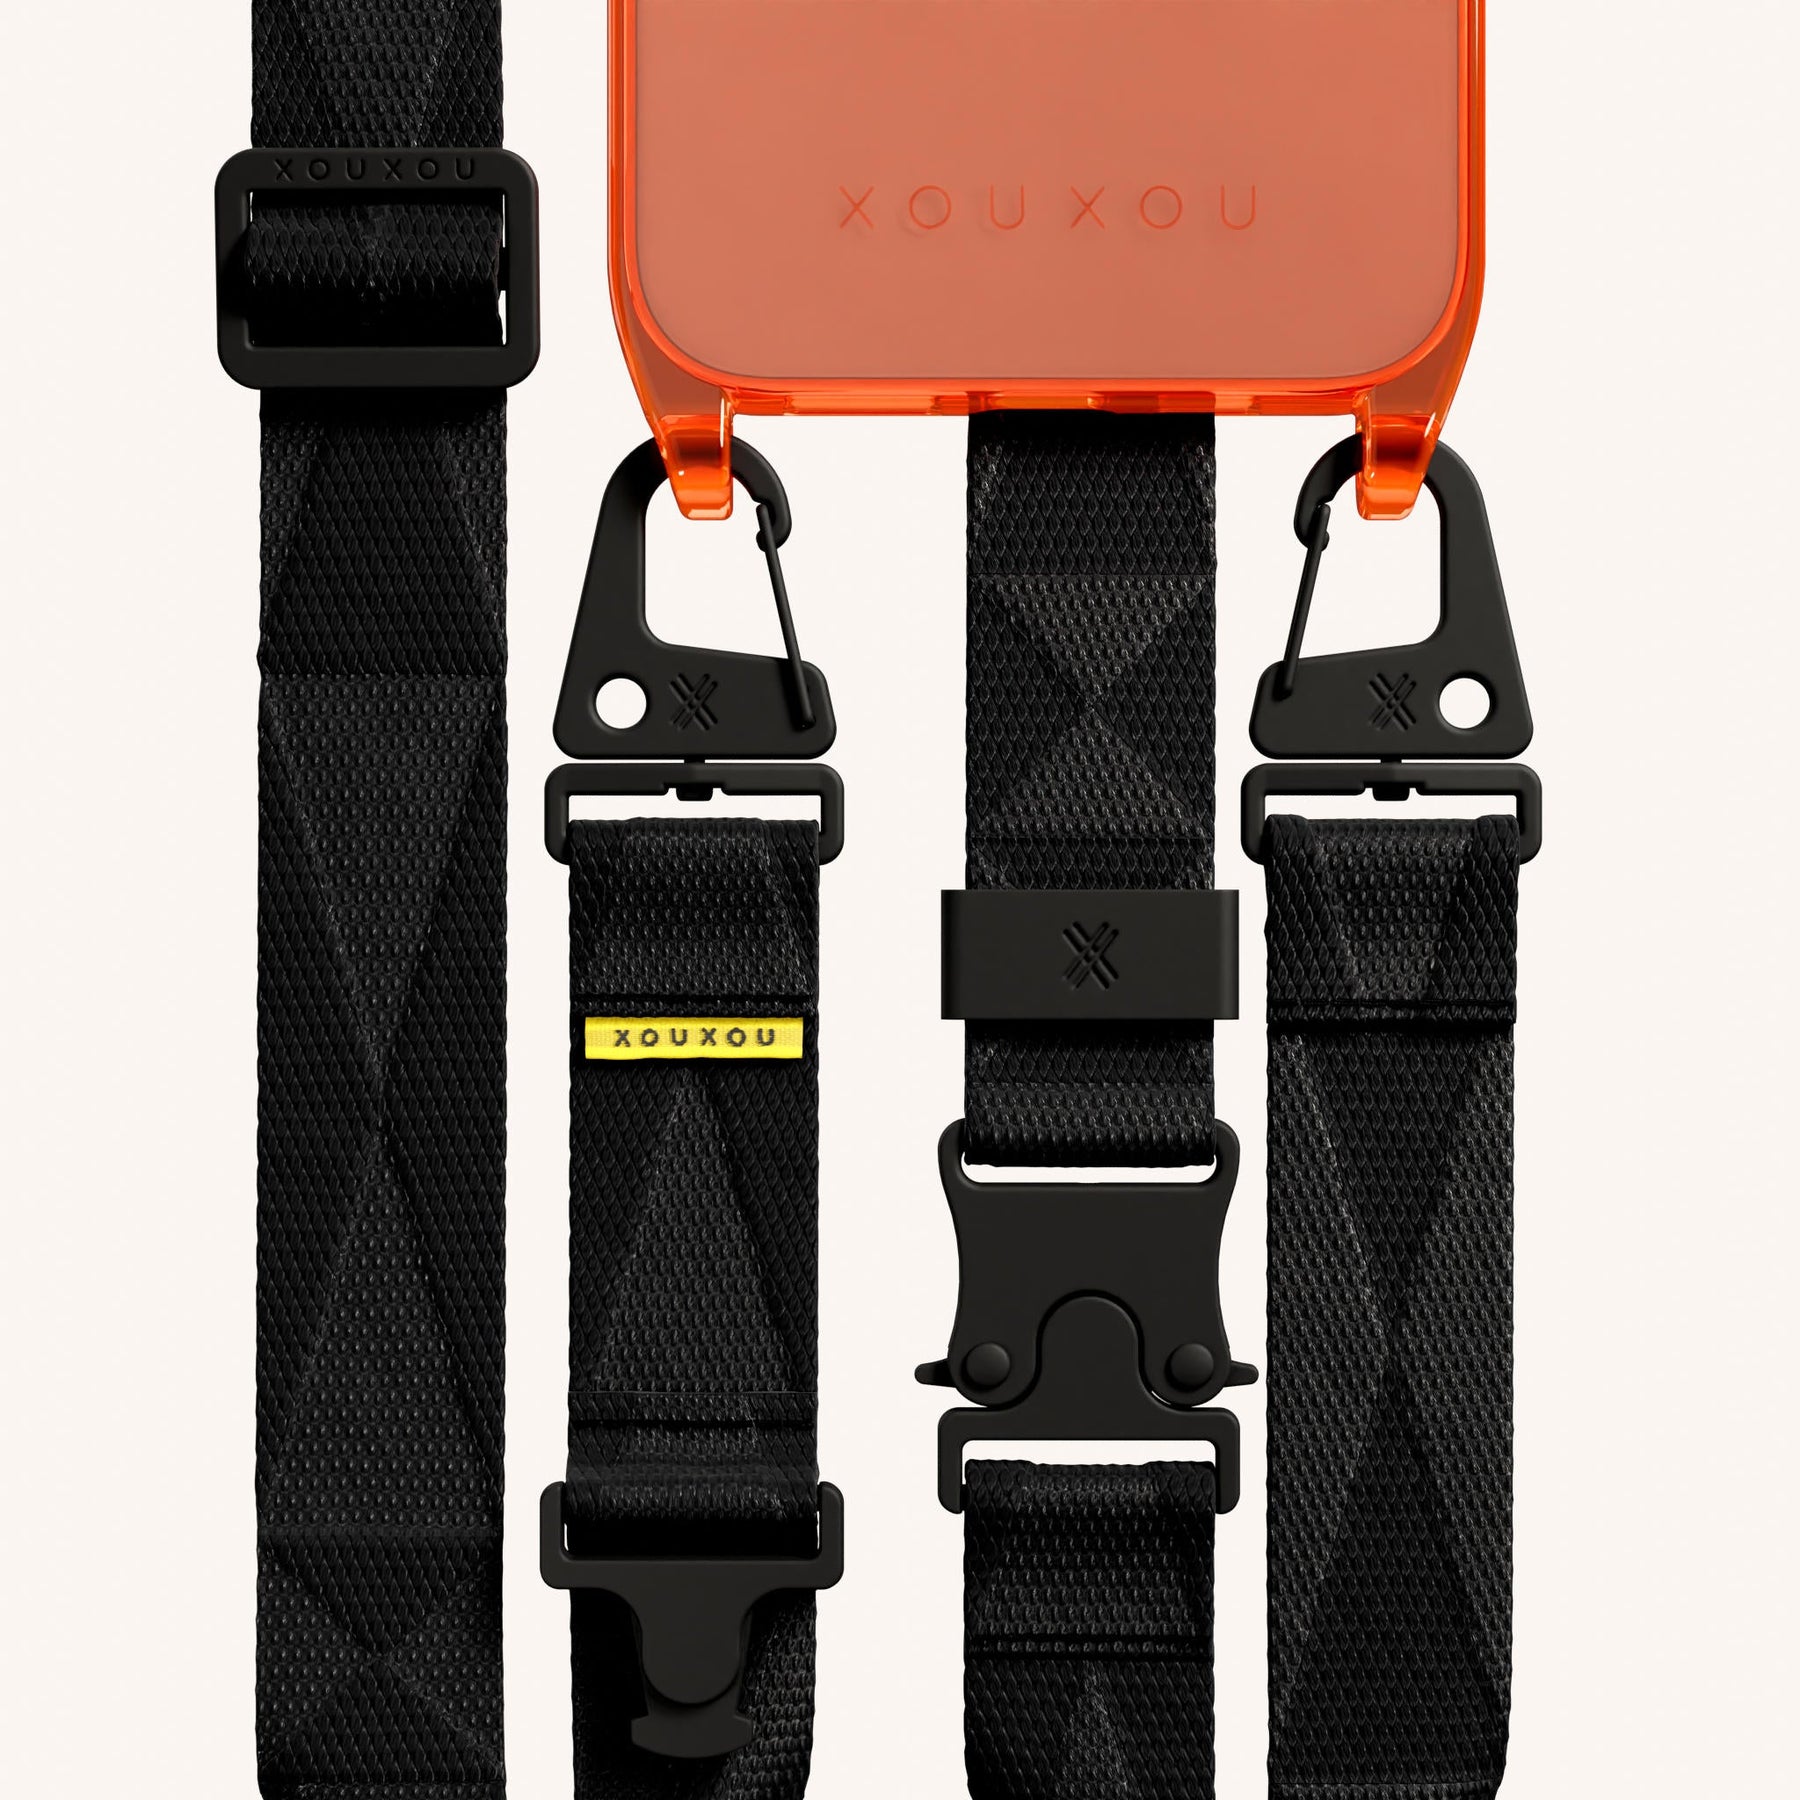 Phone Necklace with Lanyard in Neon Orange Clear + Black